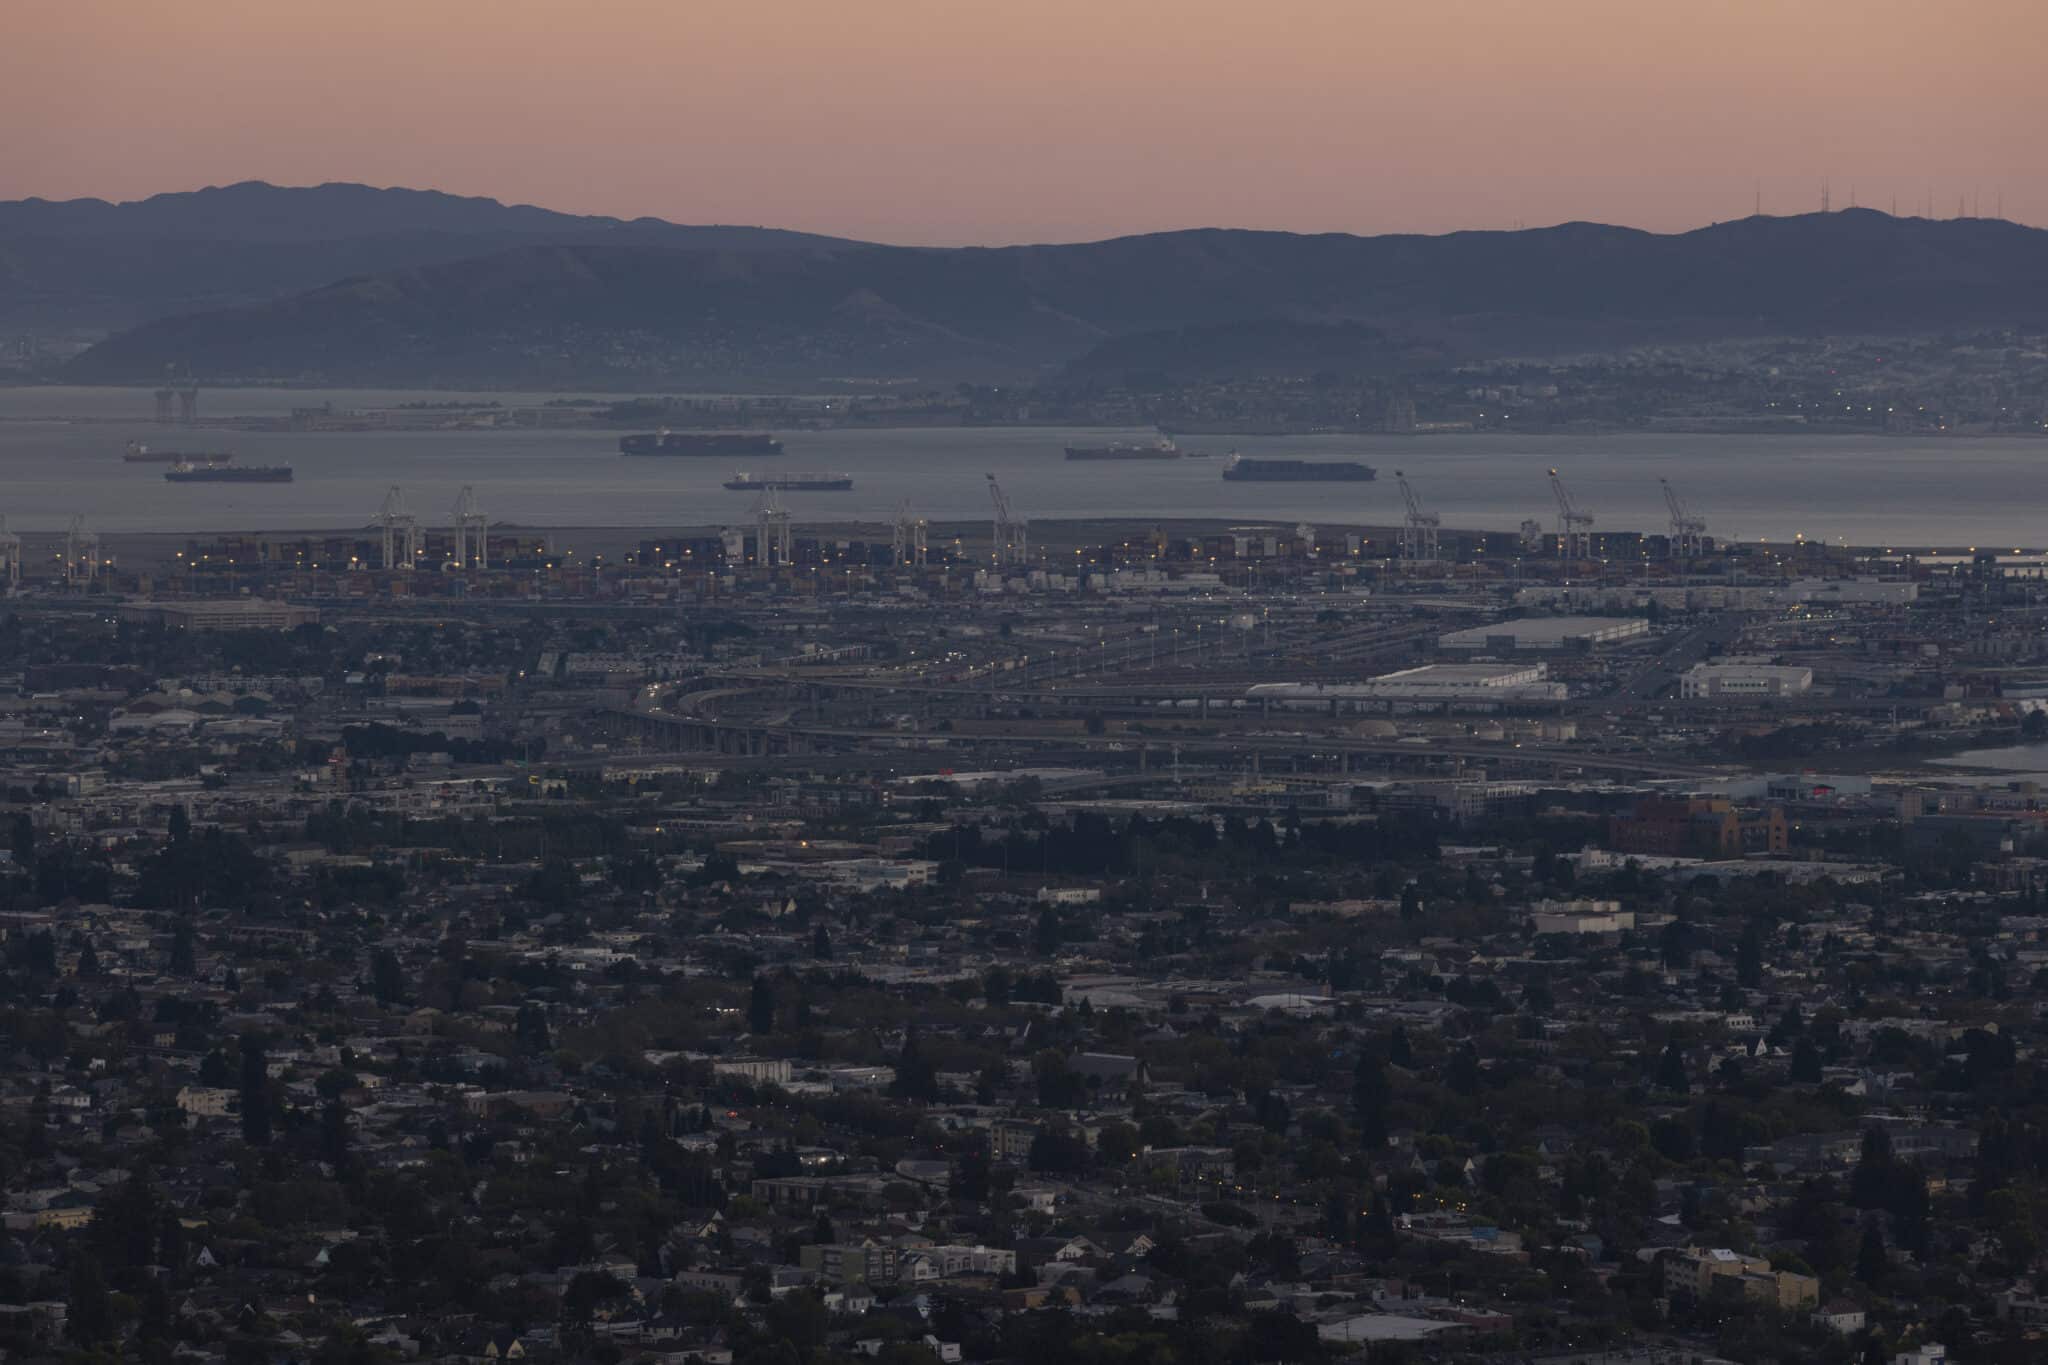 Oakland, California, residents facing disparities due to pollution.